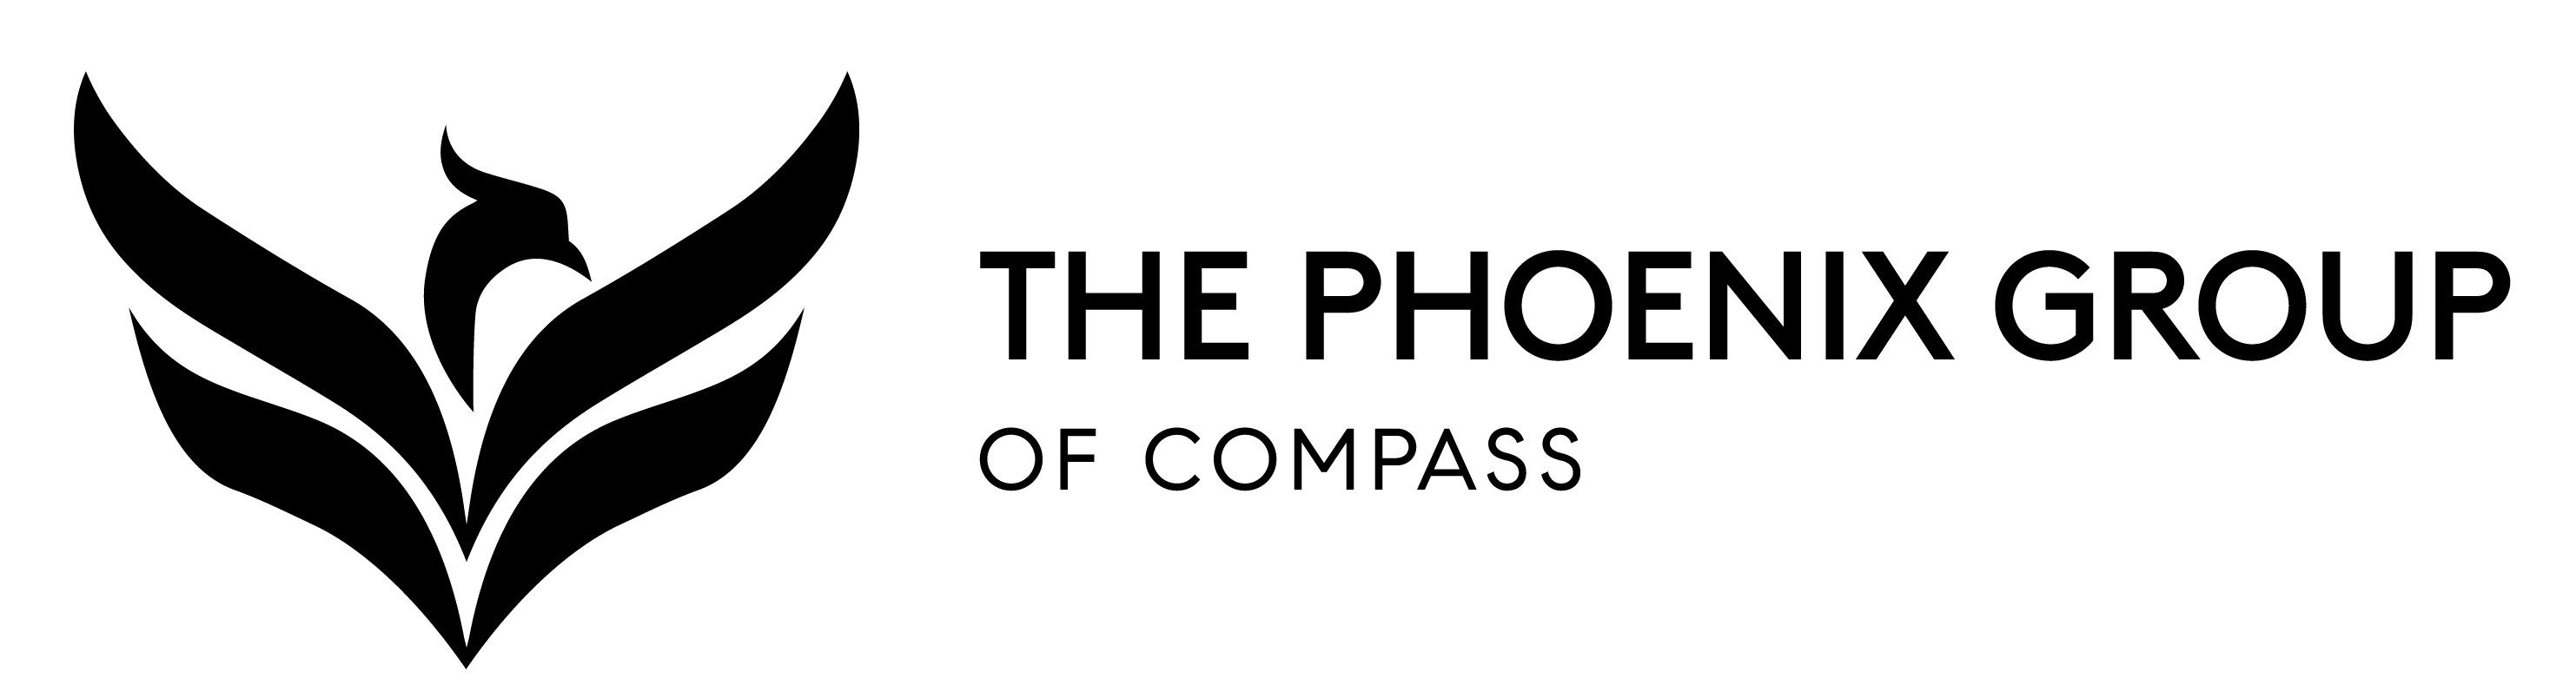 A text banner for The Phoenix Group